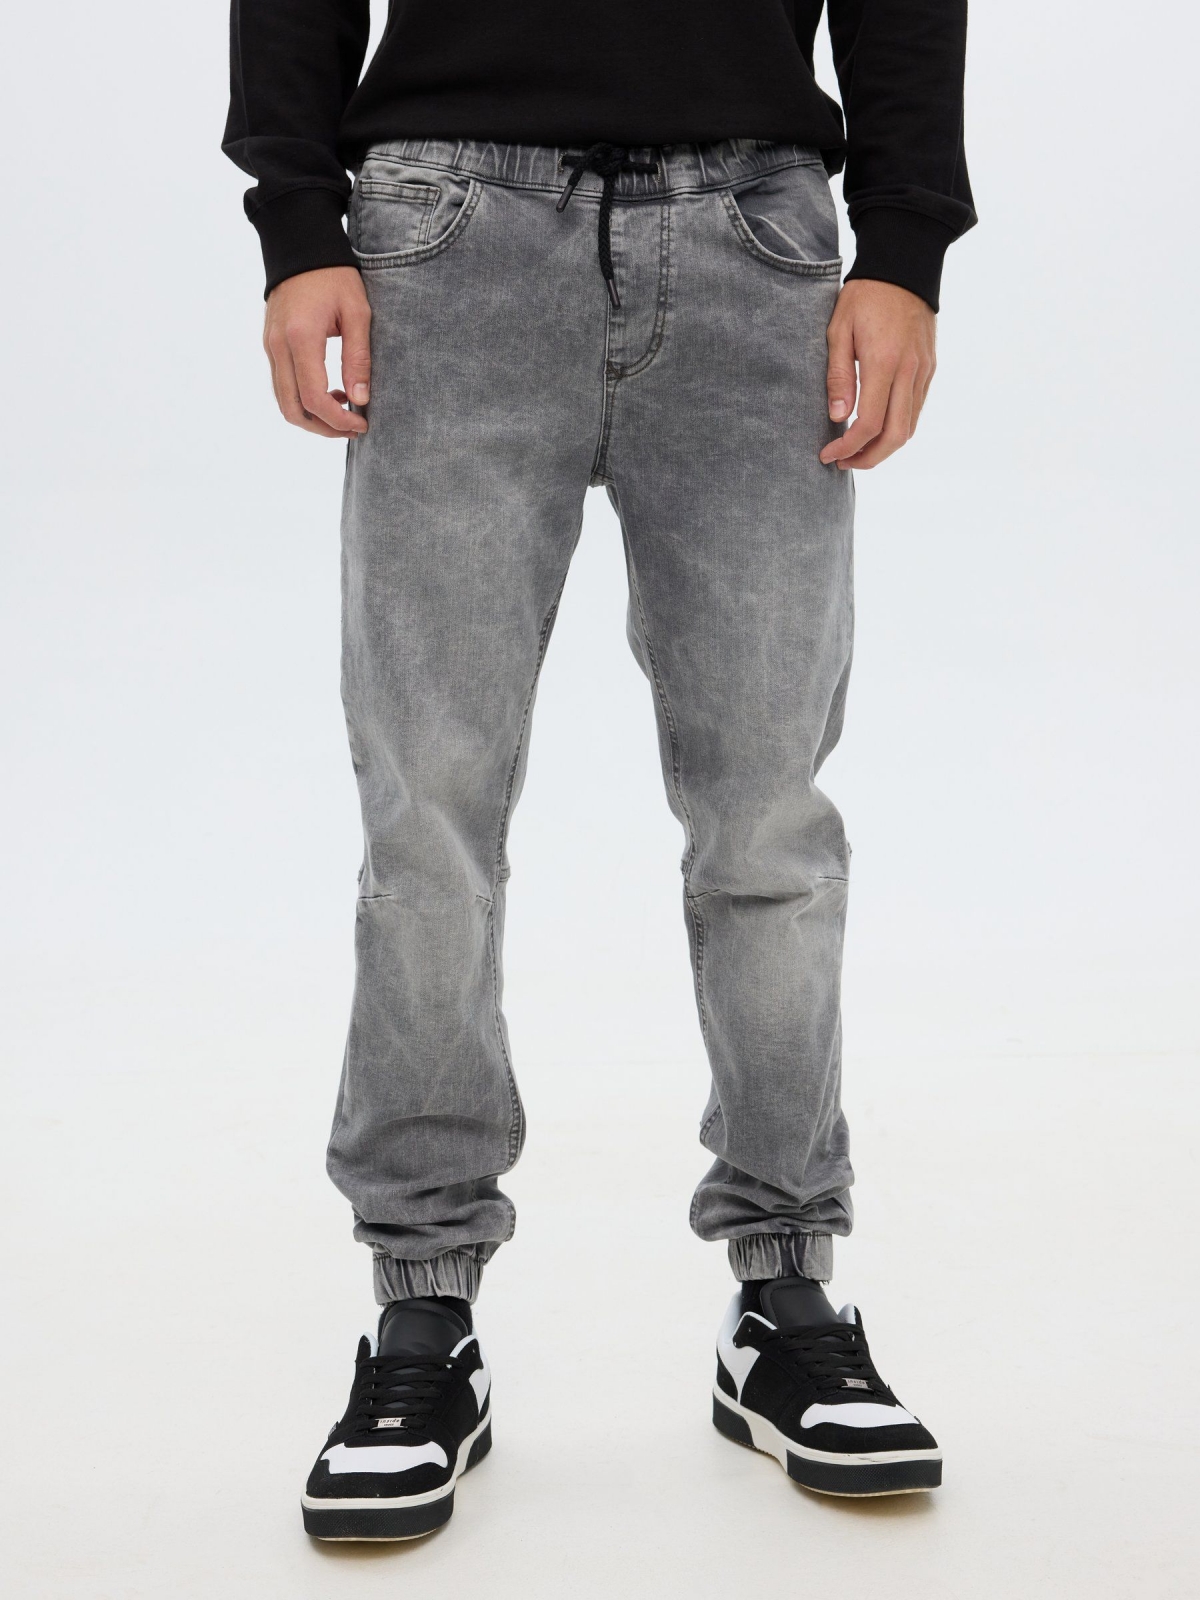 Jogger pants dark grey middle back view